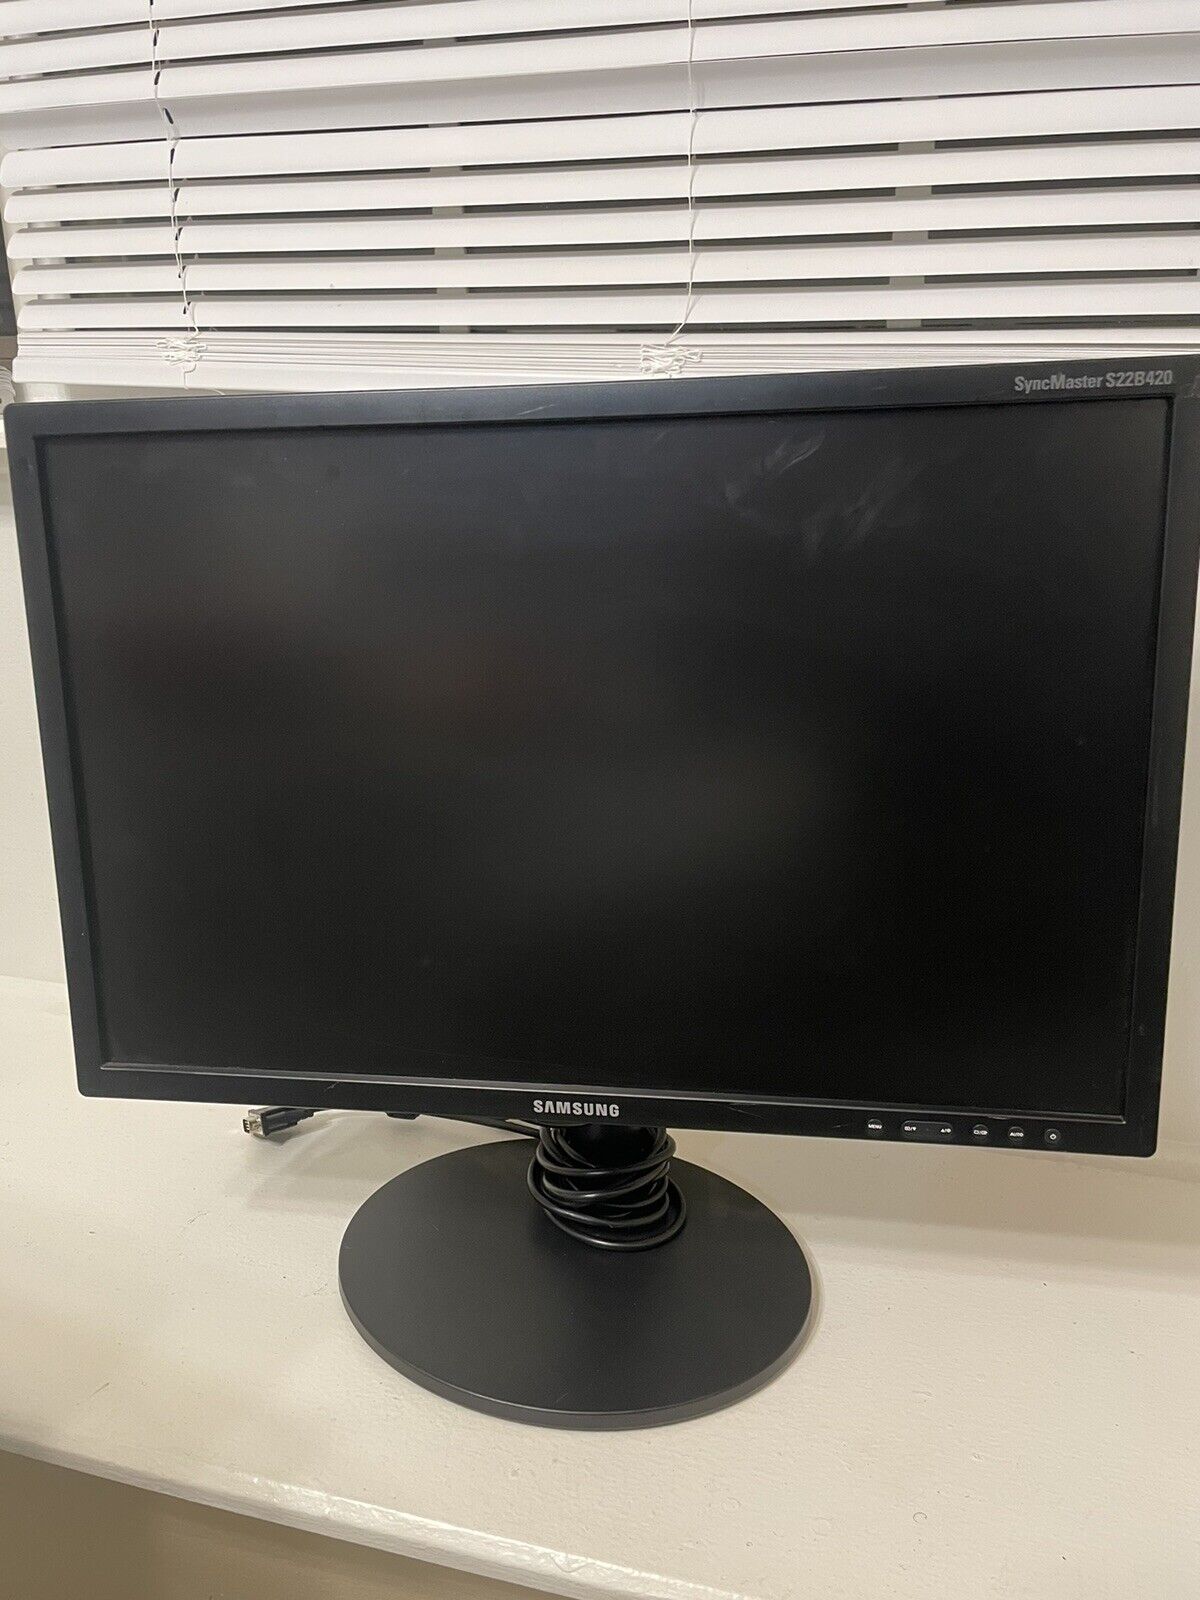 Samsung SyncMaster S22B420 22 inch LED Computer Monitor